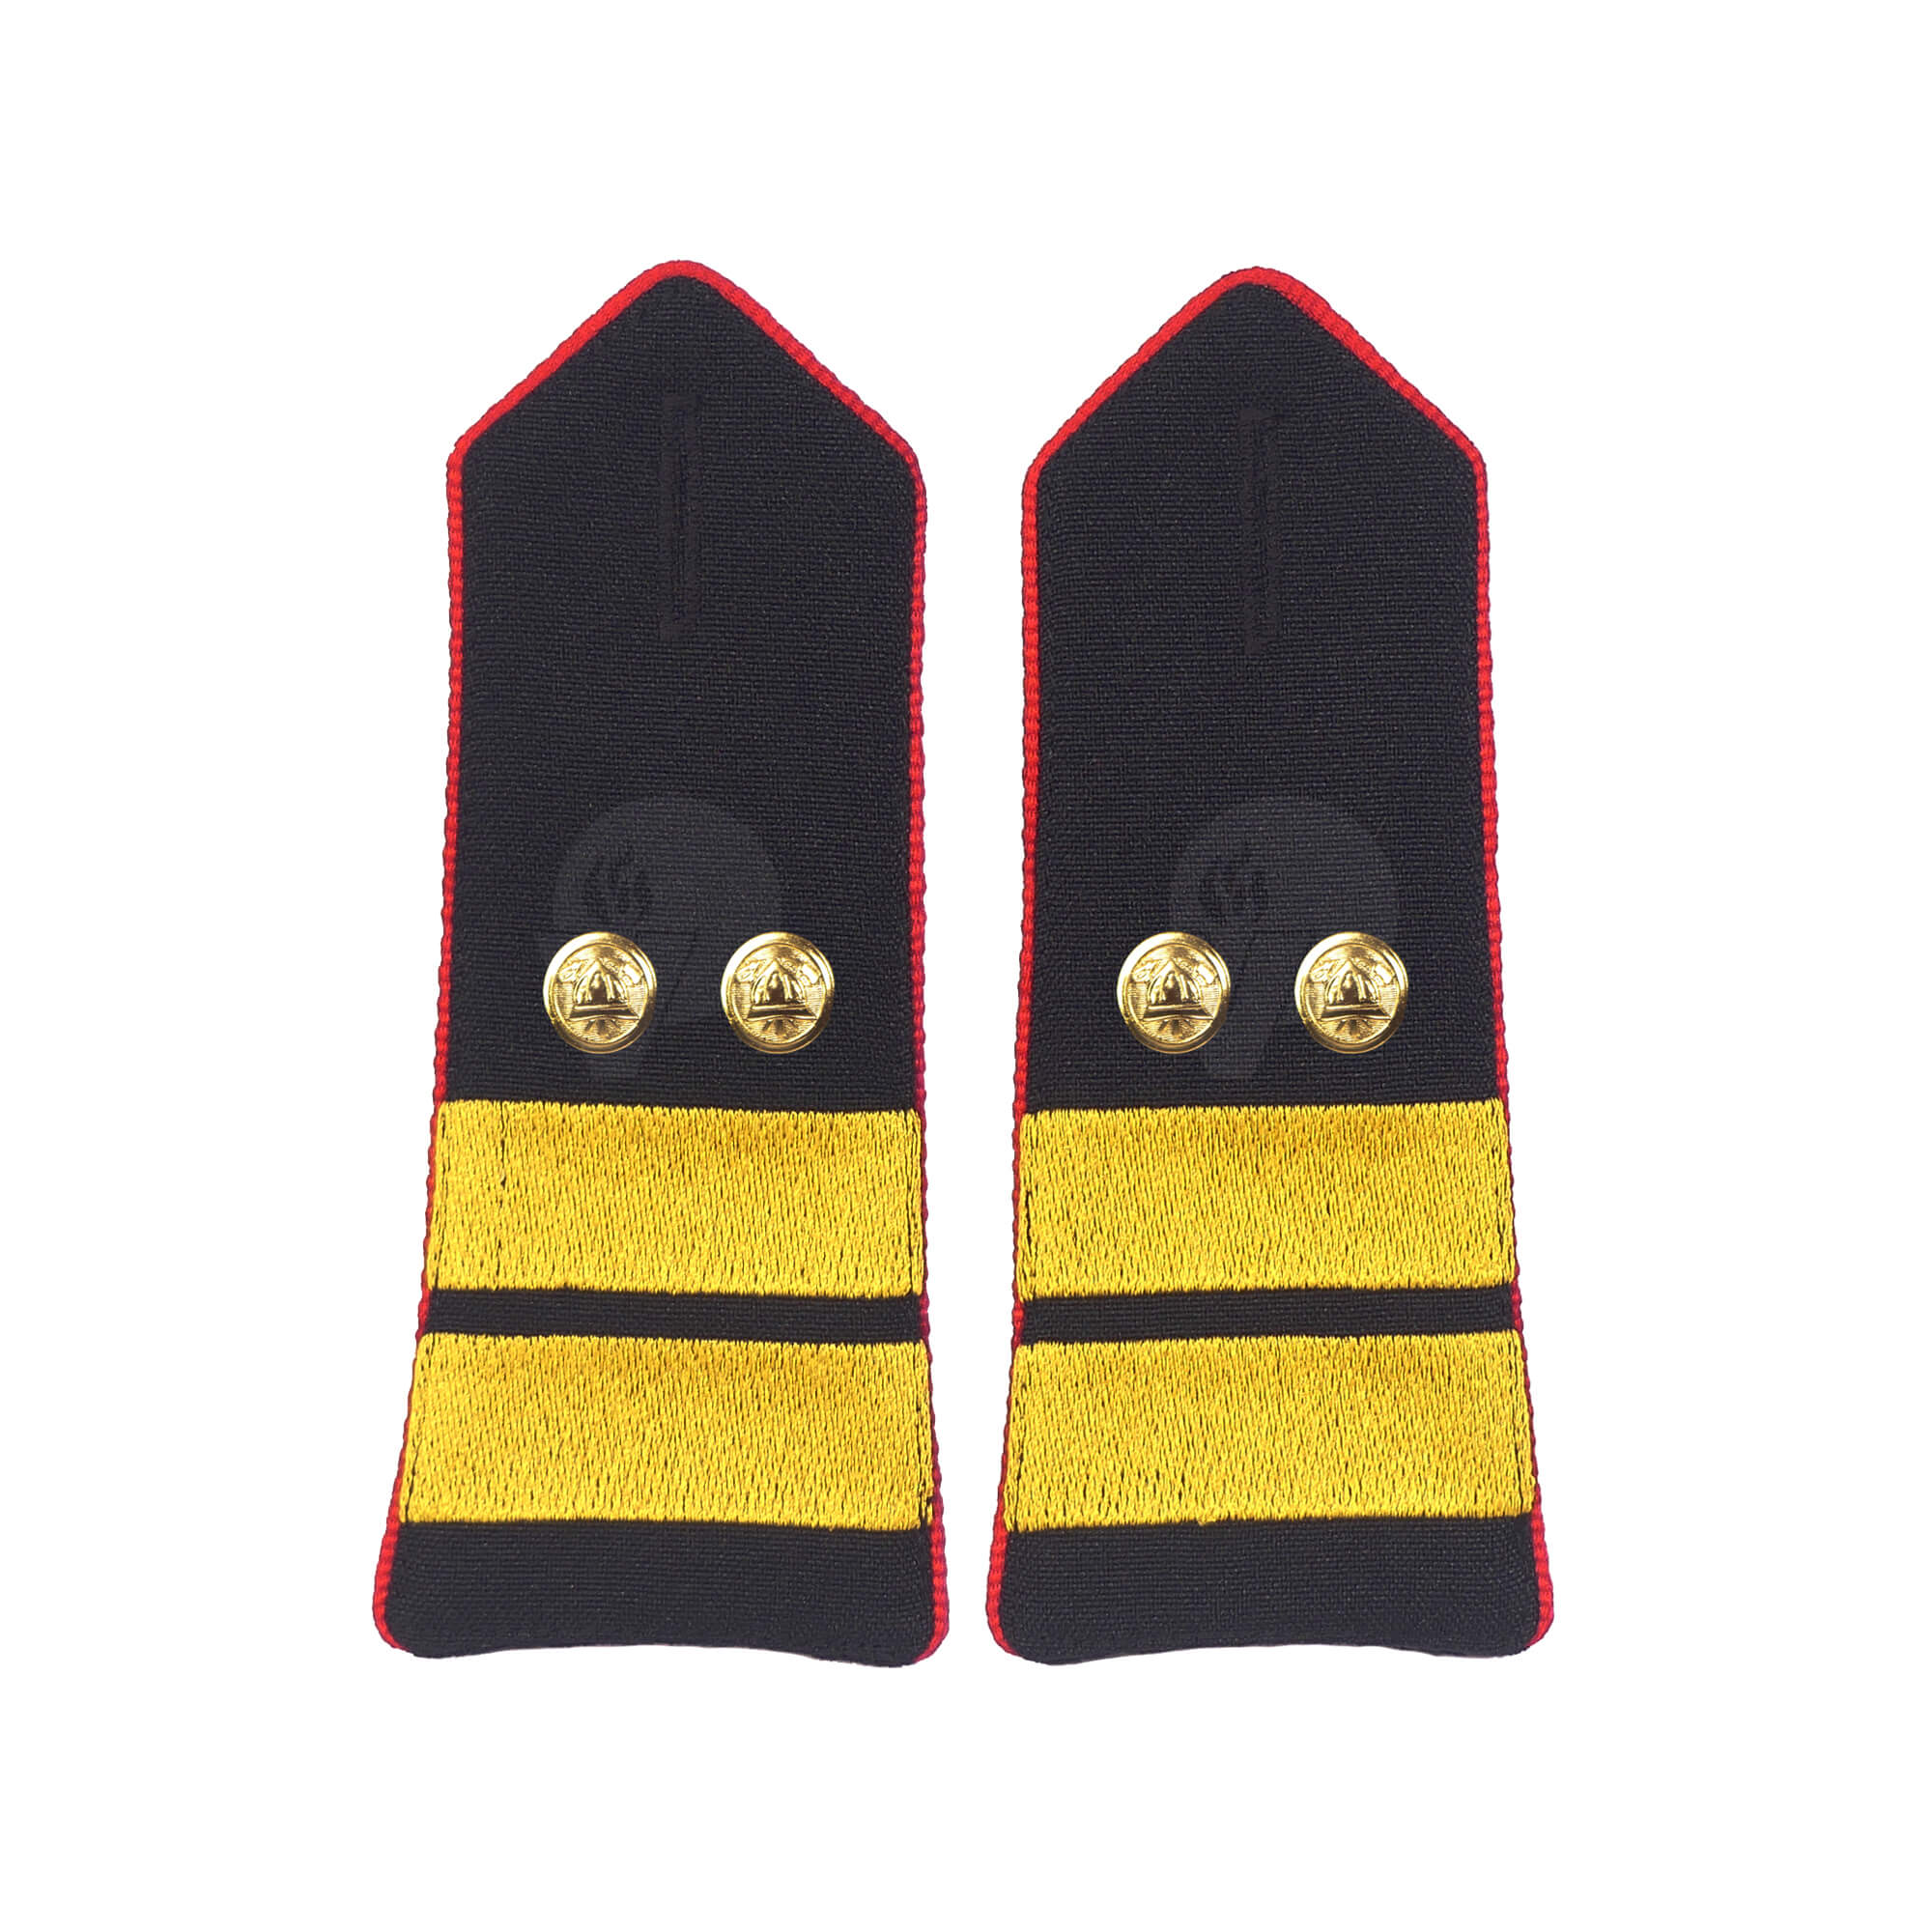 Rank Marks for Professional Firefighters, Senior Fire Officer